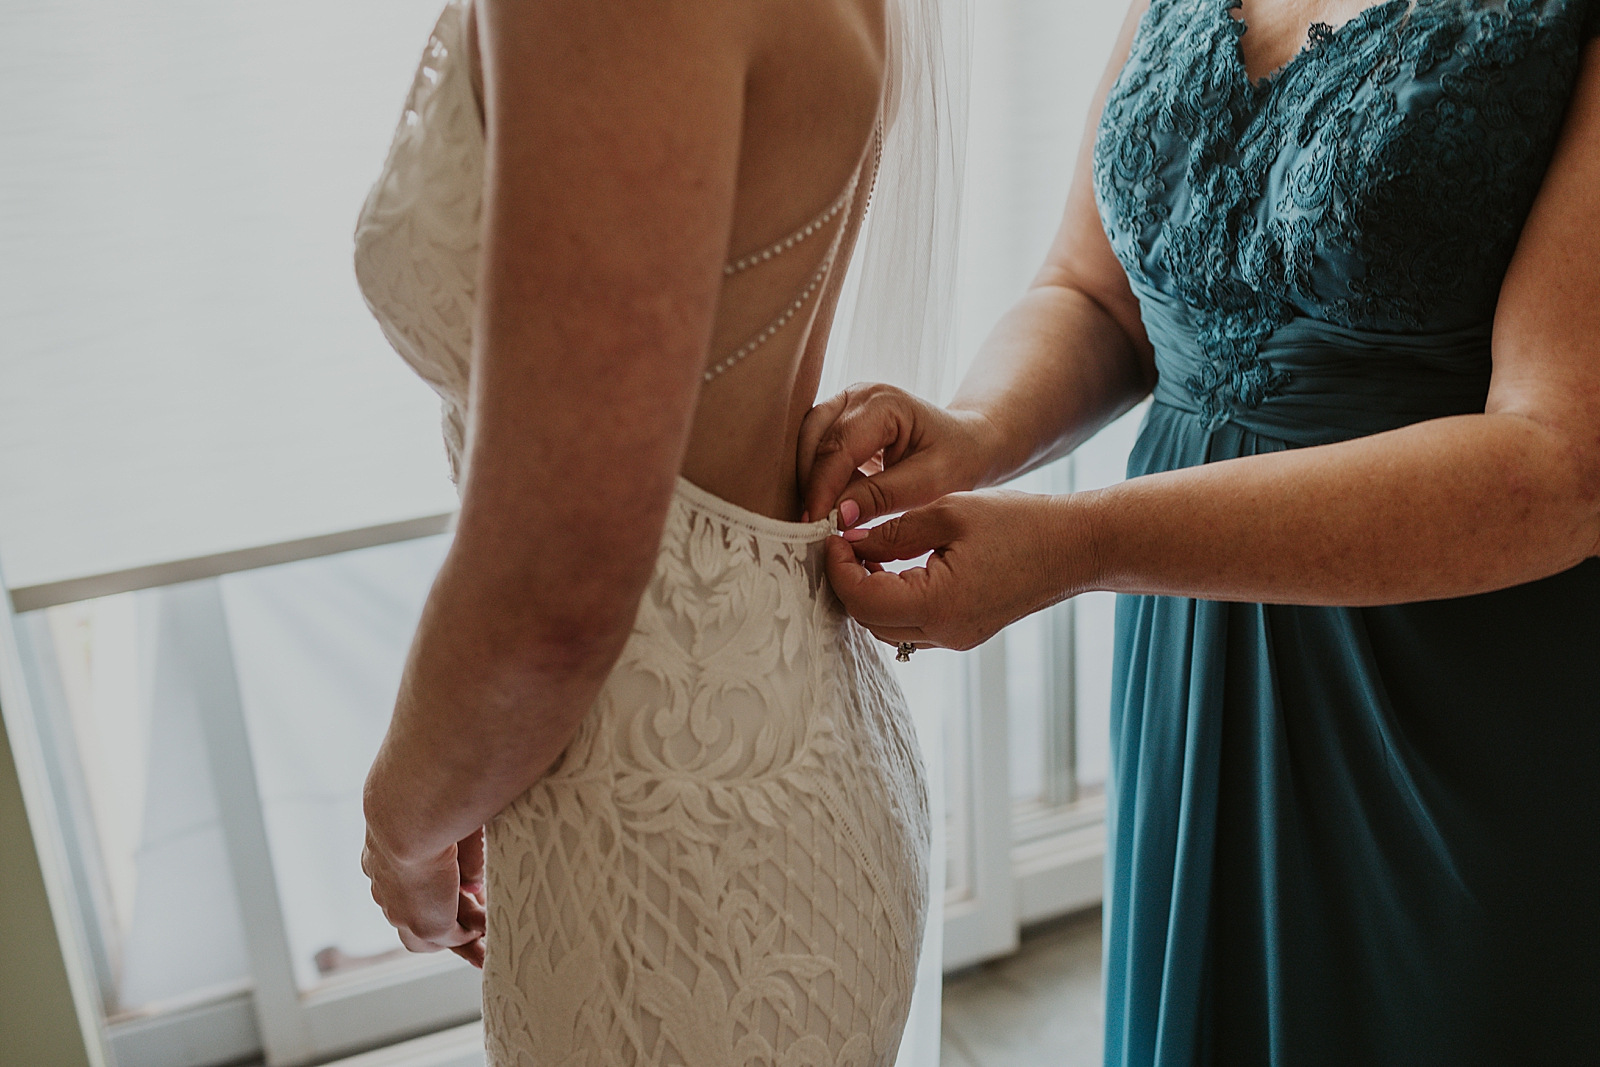 Mother helping Bride get wedding dress buttoned by the window